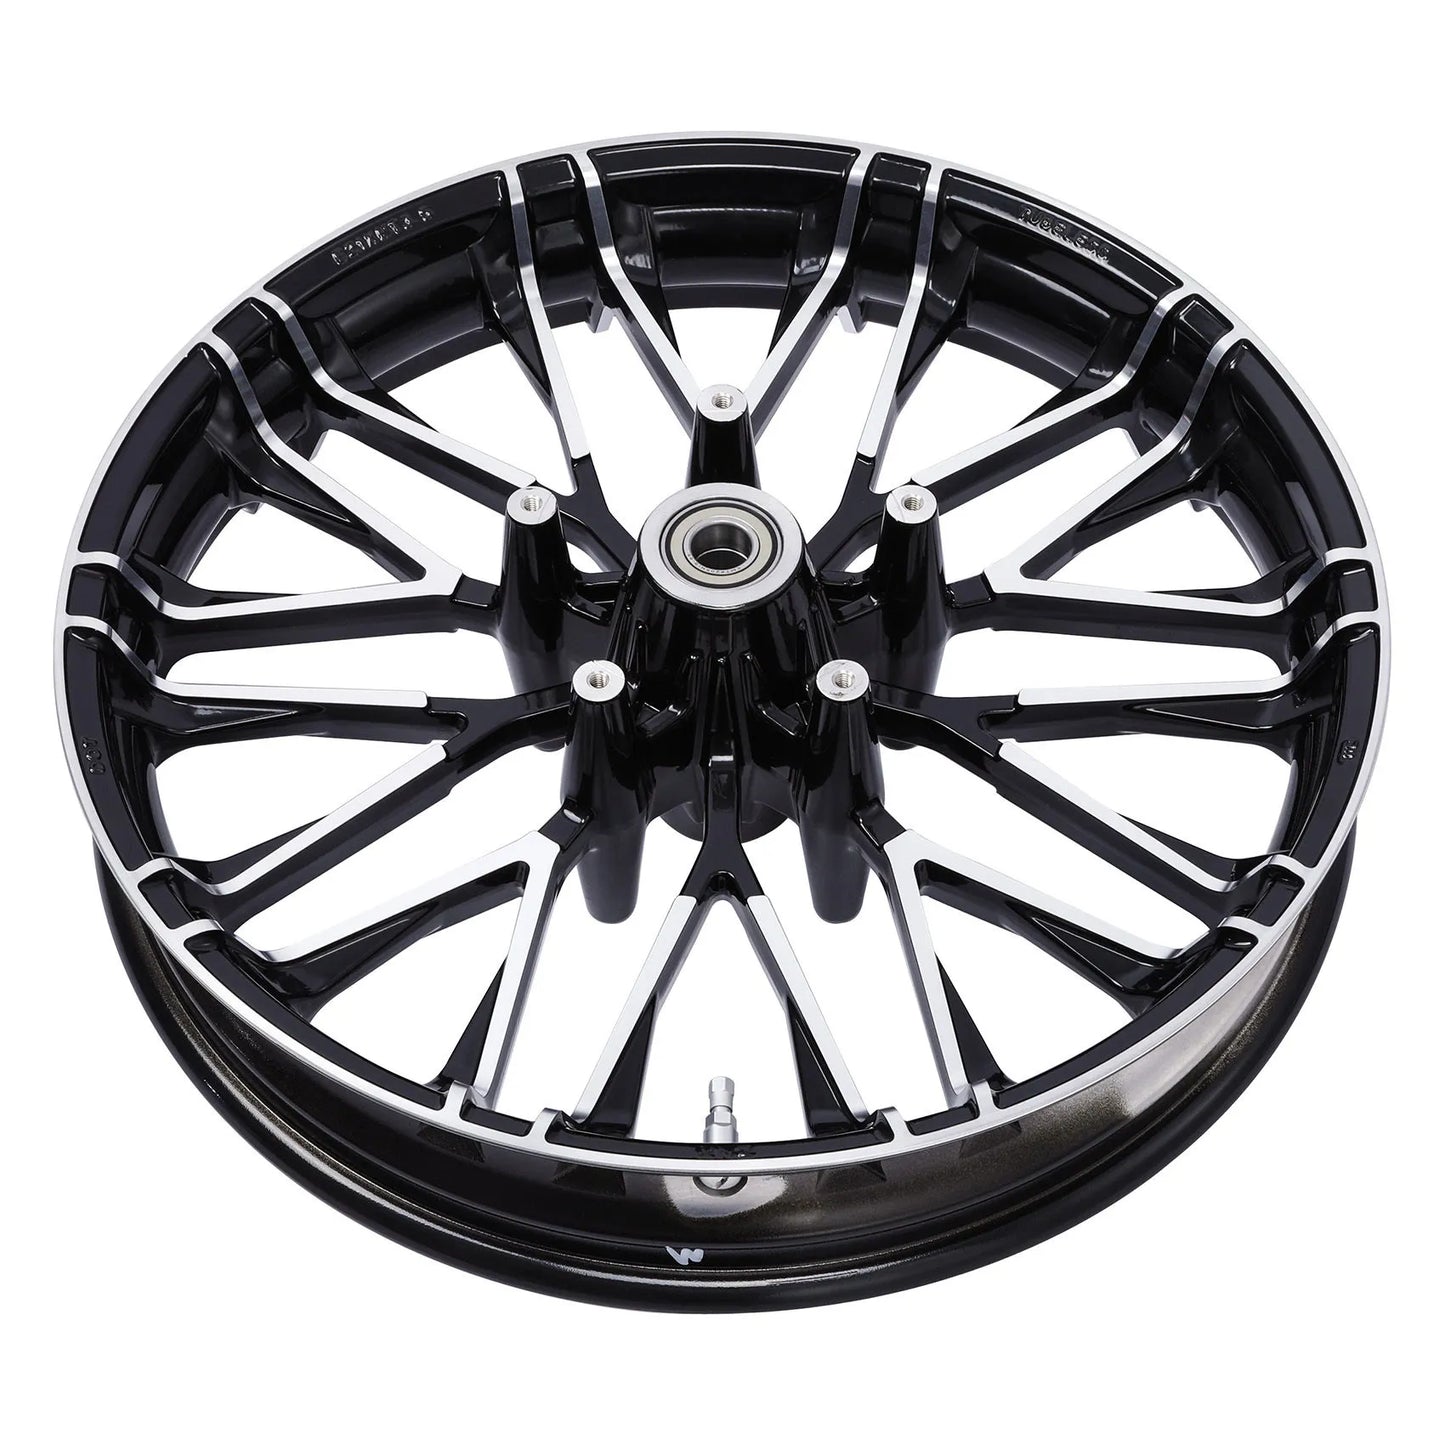 Voodoo Cycle House Custom 21" x 3.5" Front Wheel For Harley-Davidson & Custom Applications Touring Street Glide 2008-UP